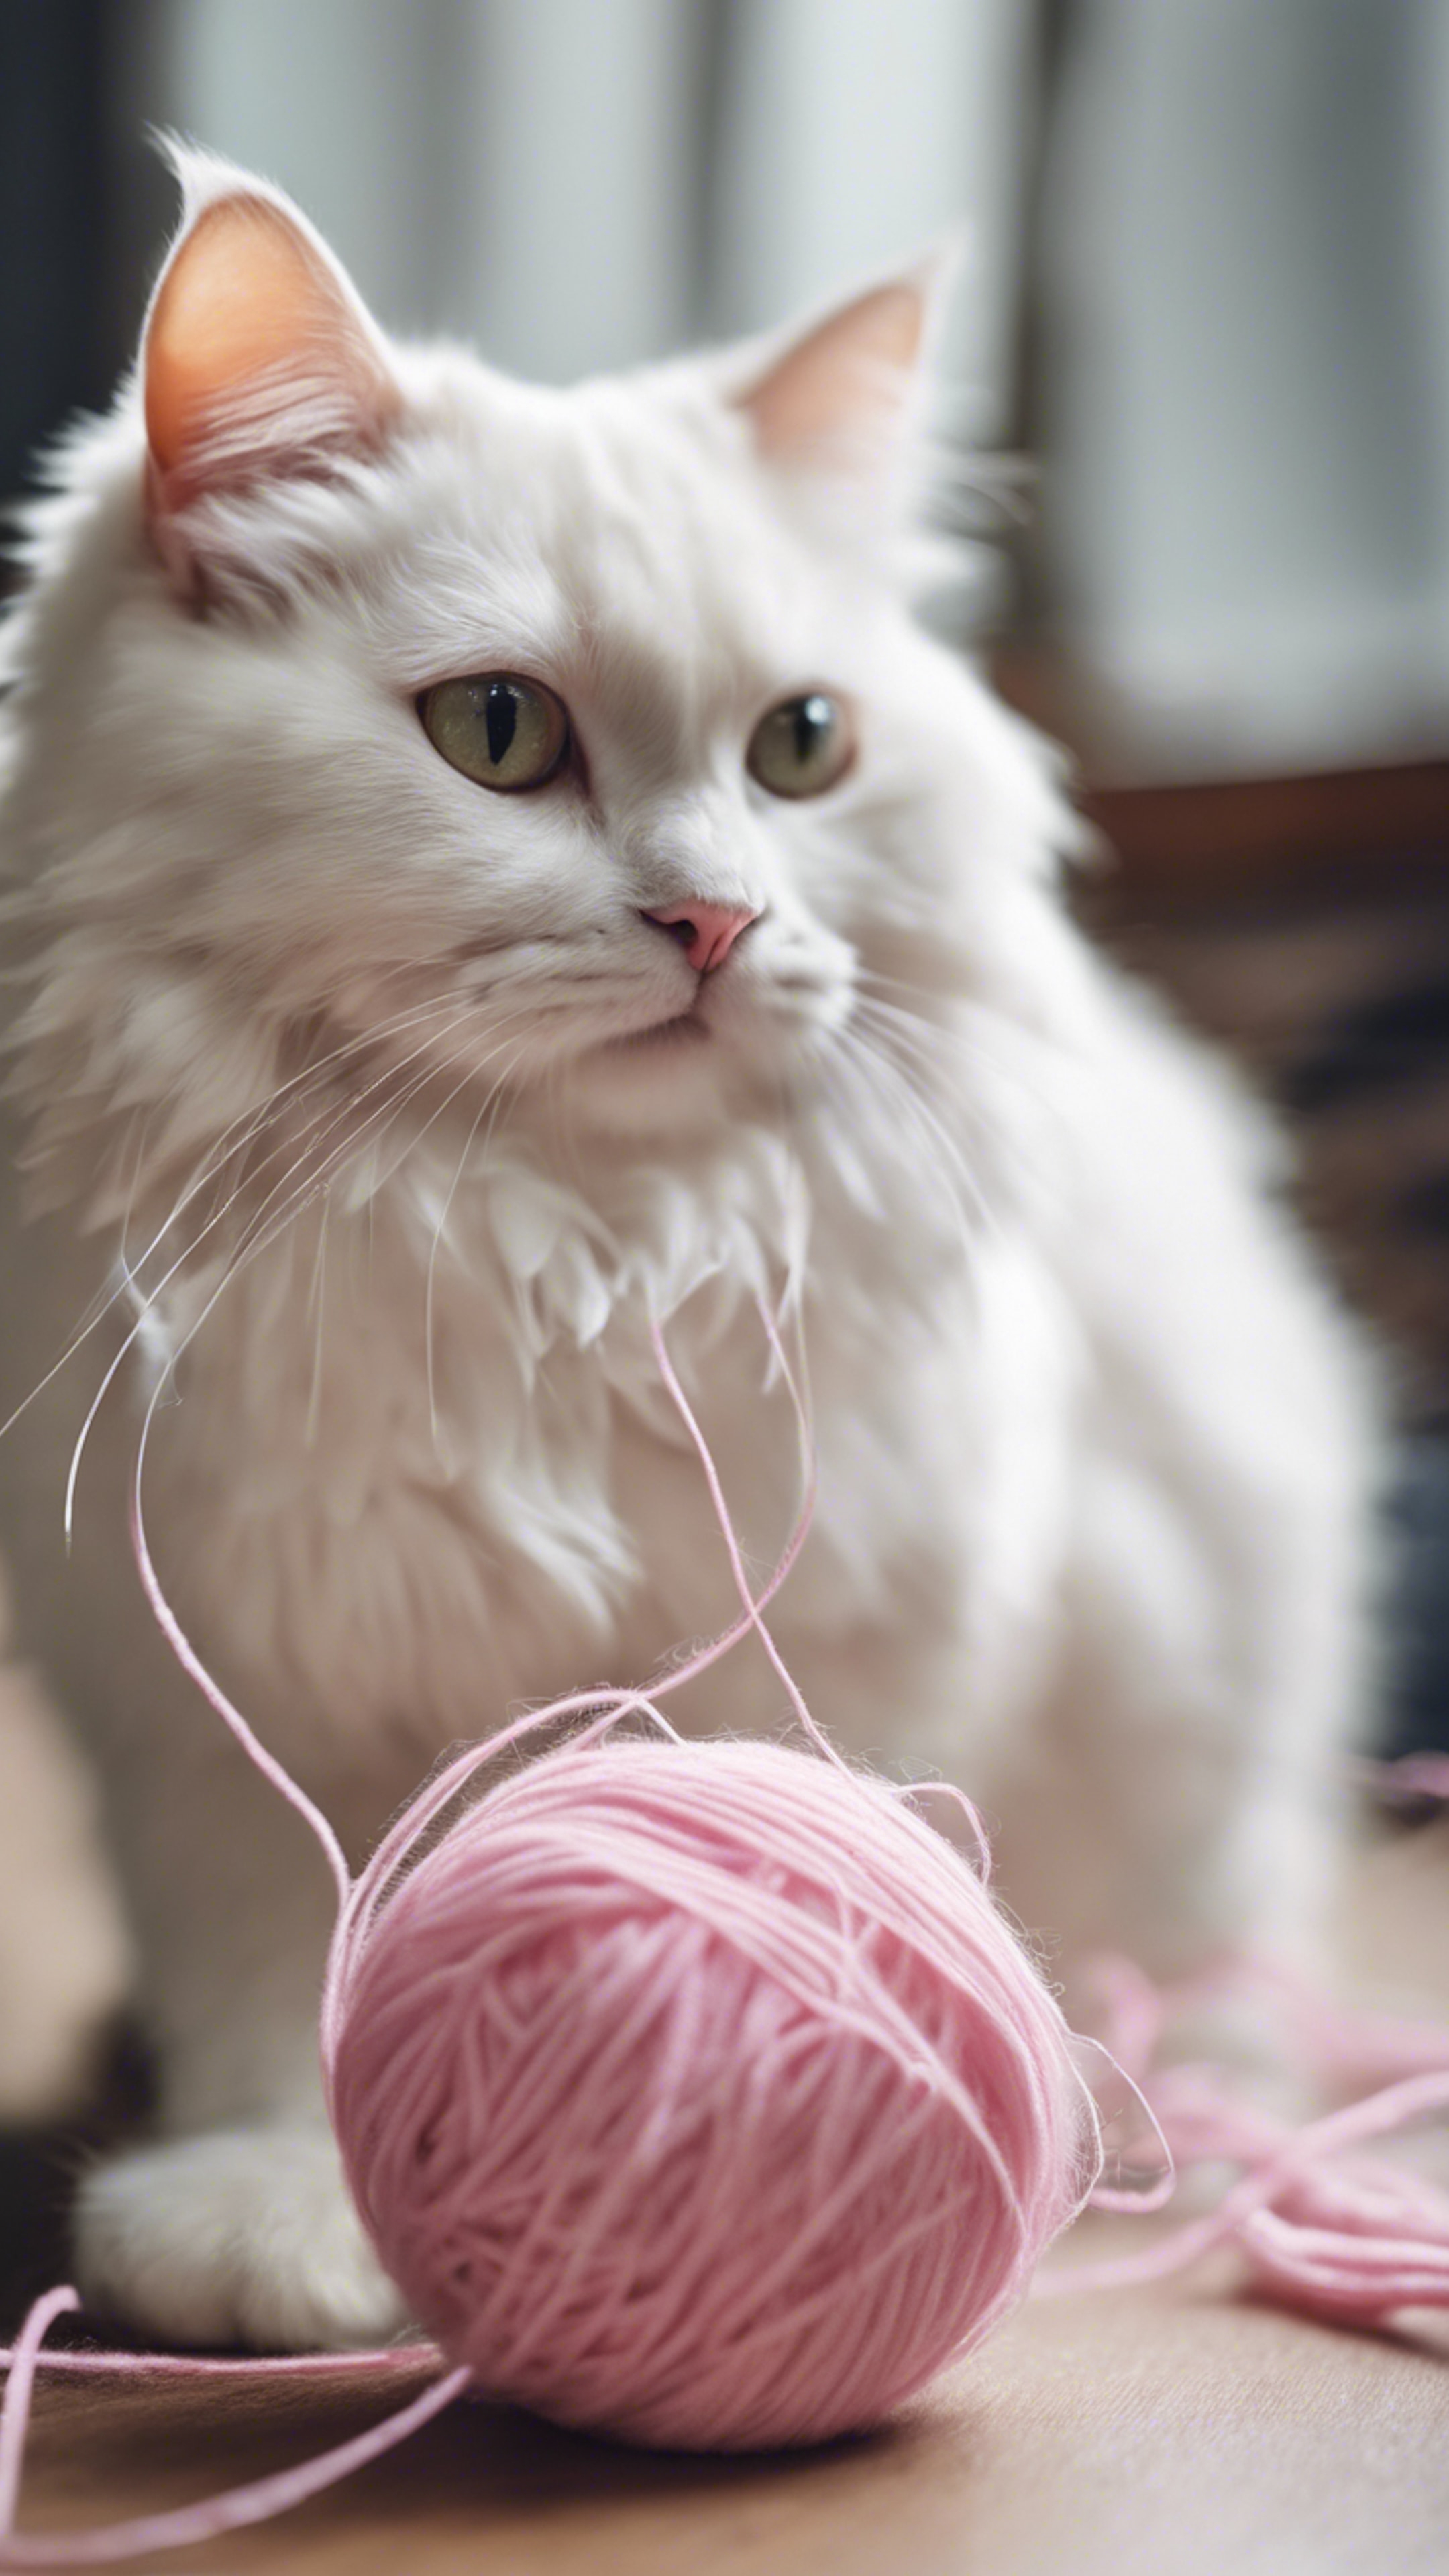 An adorable white cat, fluff all around, playing with a pink ball of yarn. 벽지[2f9056787526421e963d]